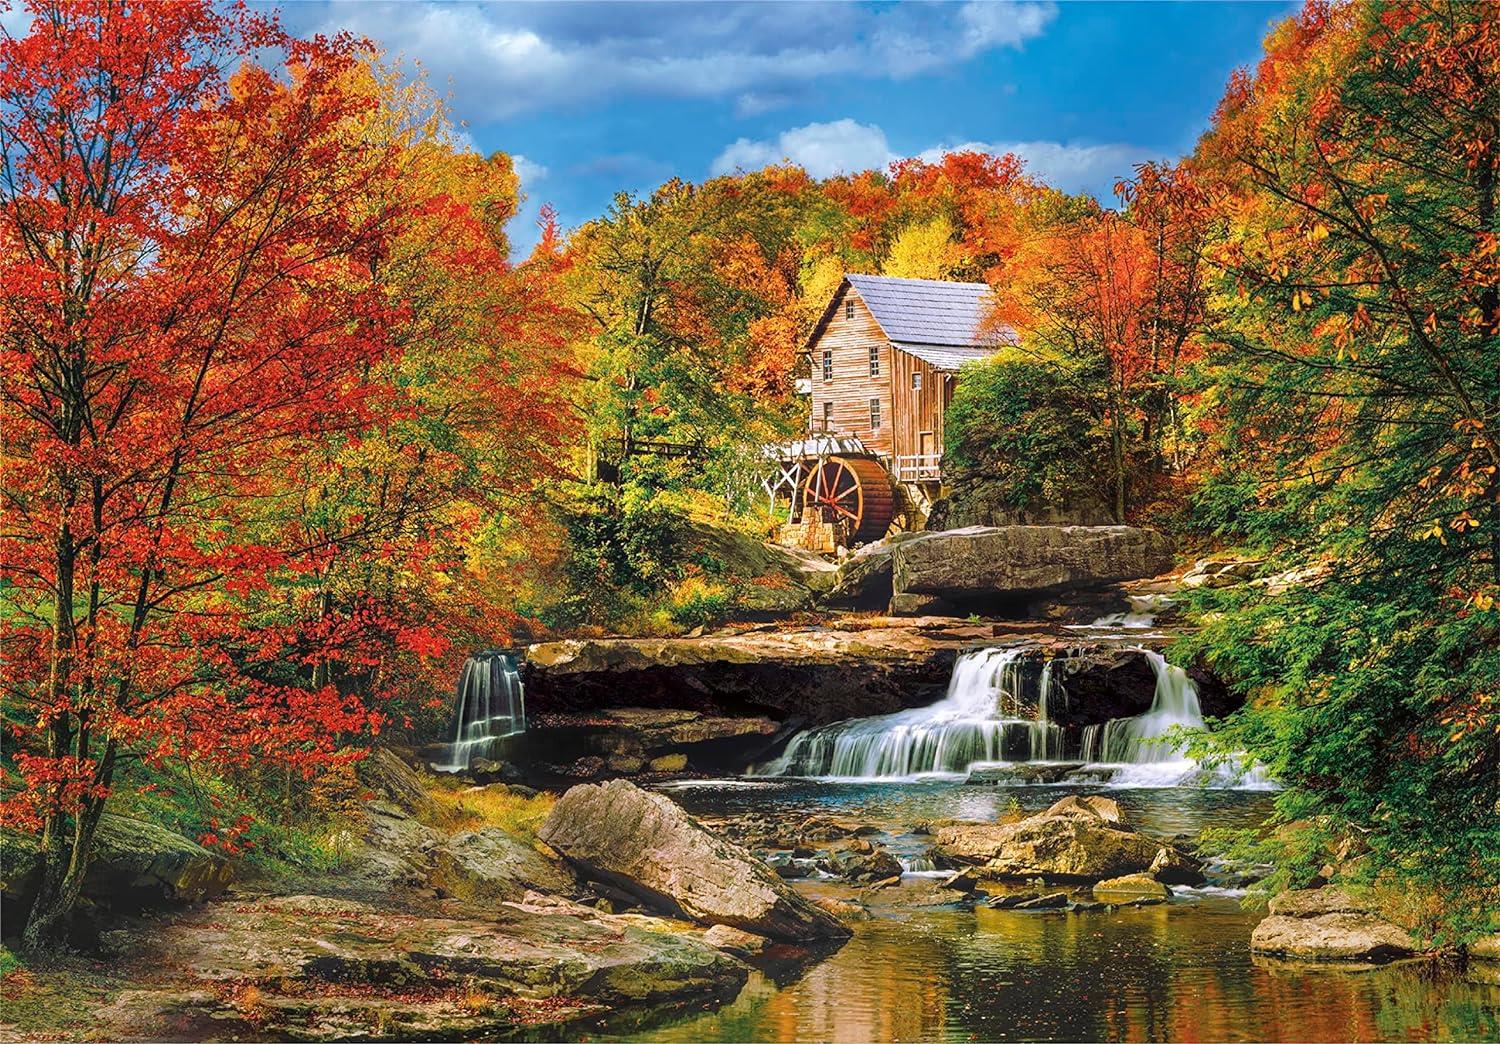 Clementoni Glade Creek Grist Mill Jigsaw Puzzle (2000 Pieces)